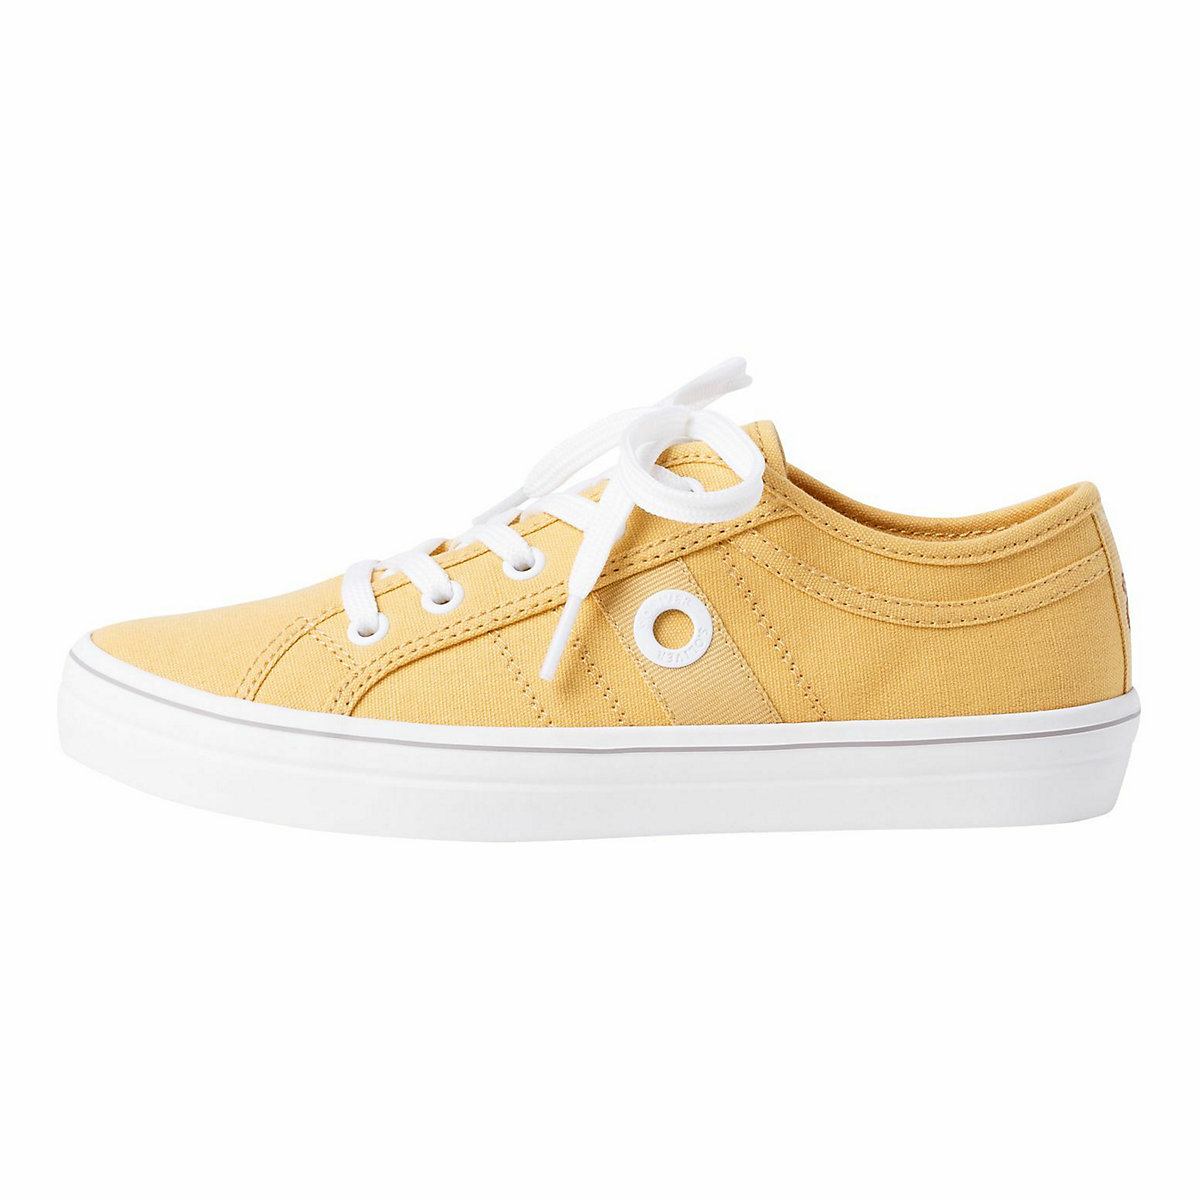 s.Oliver s.Oliver Sneaker Sneakers Low gelb